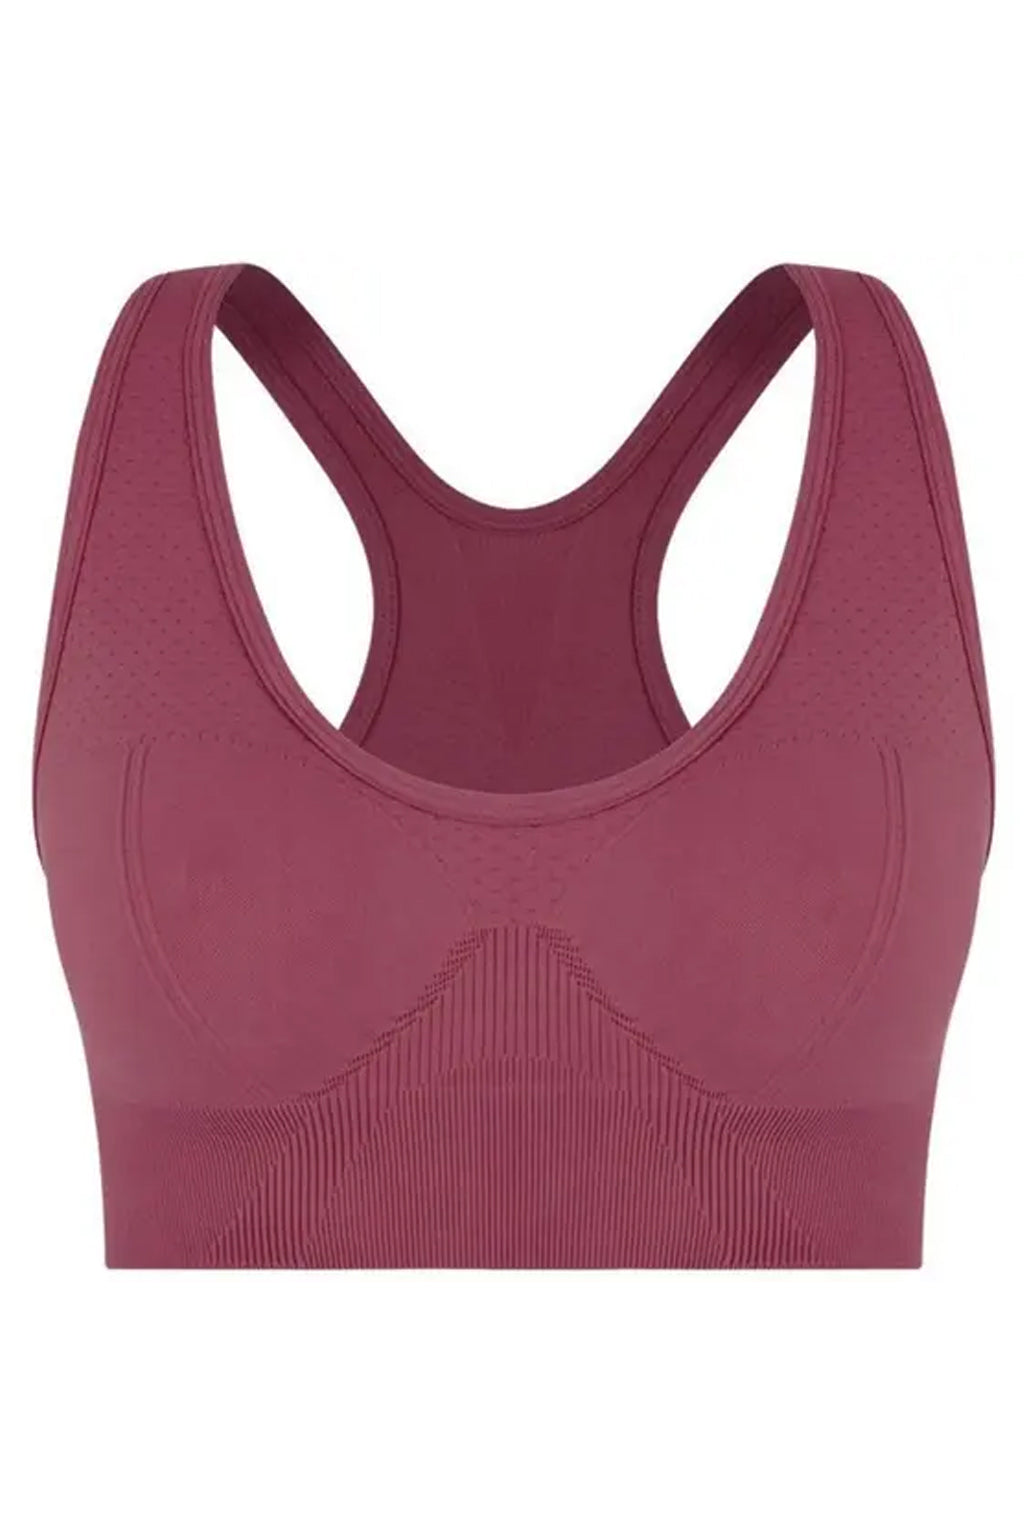 Top Up Control Comfort fit High Support Sport Bra